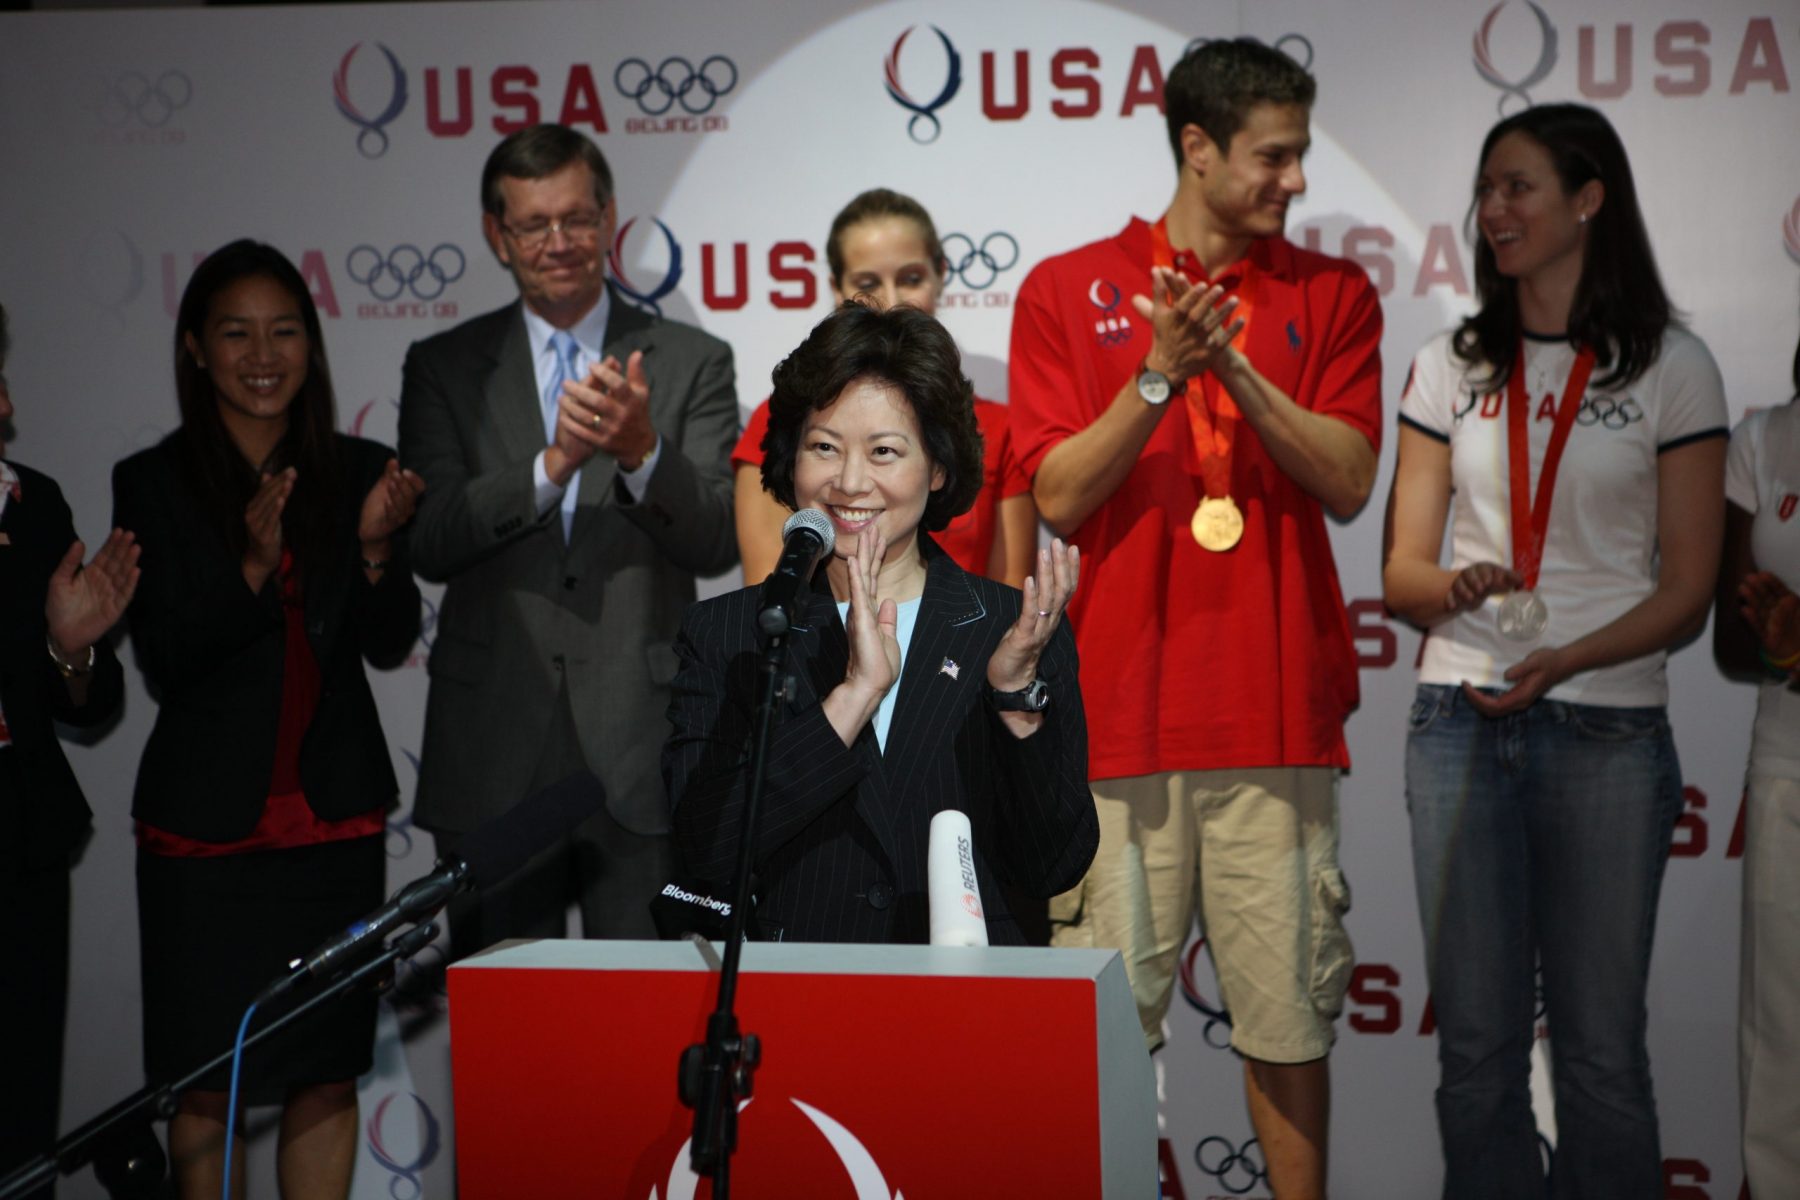 Head of the U.S. Presidential Delegation to the closing ceremony of the Beijing Olympics, Secretary of Labor Elaine Chao gives remarks at USA House.